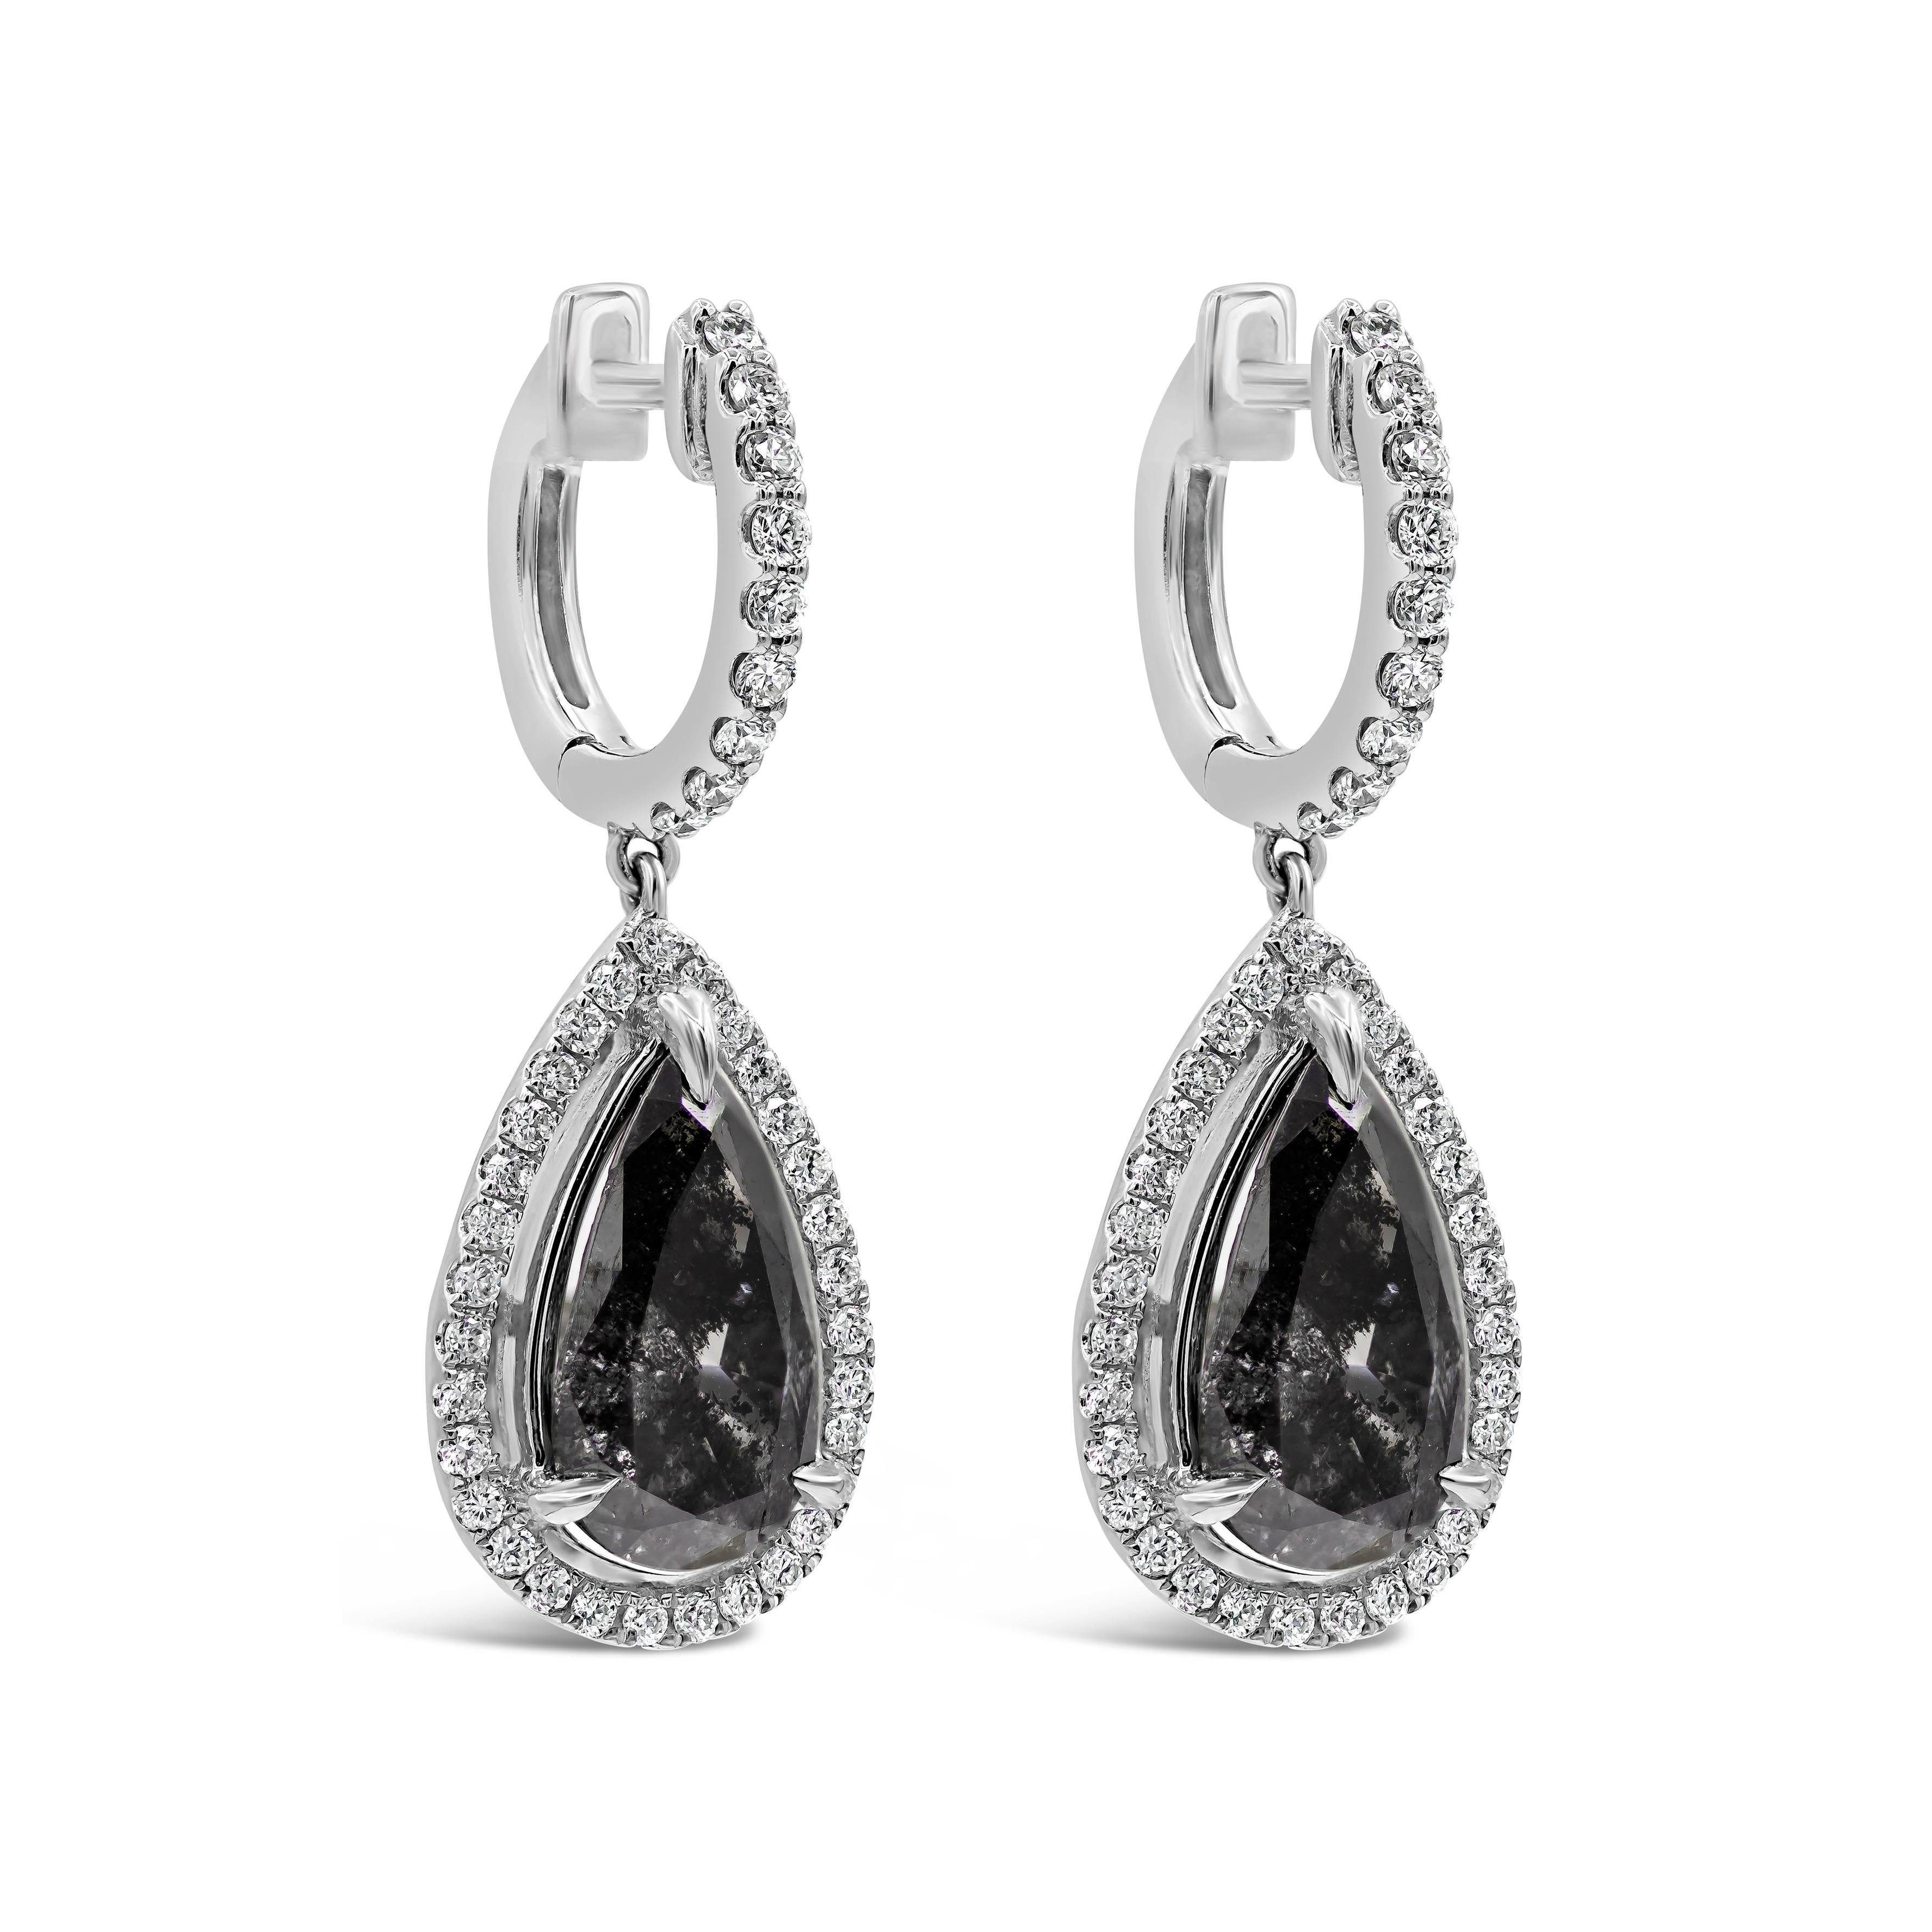 A beautiful pair of drop earrings showcasing 2 pear shape black diamonds weighing 3.17 carats total, surrounded by a single row of round brilliant diamonds weighing 0.52 carats total. Each earring is suspended on a diamond encrusted hoop and made in